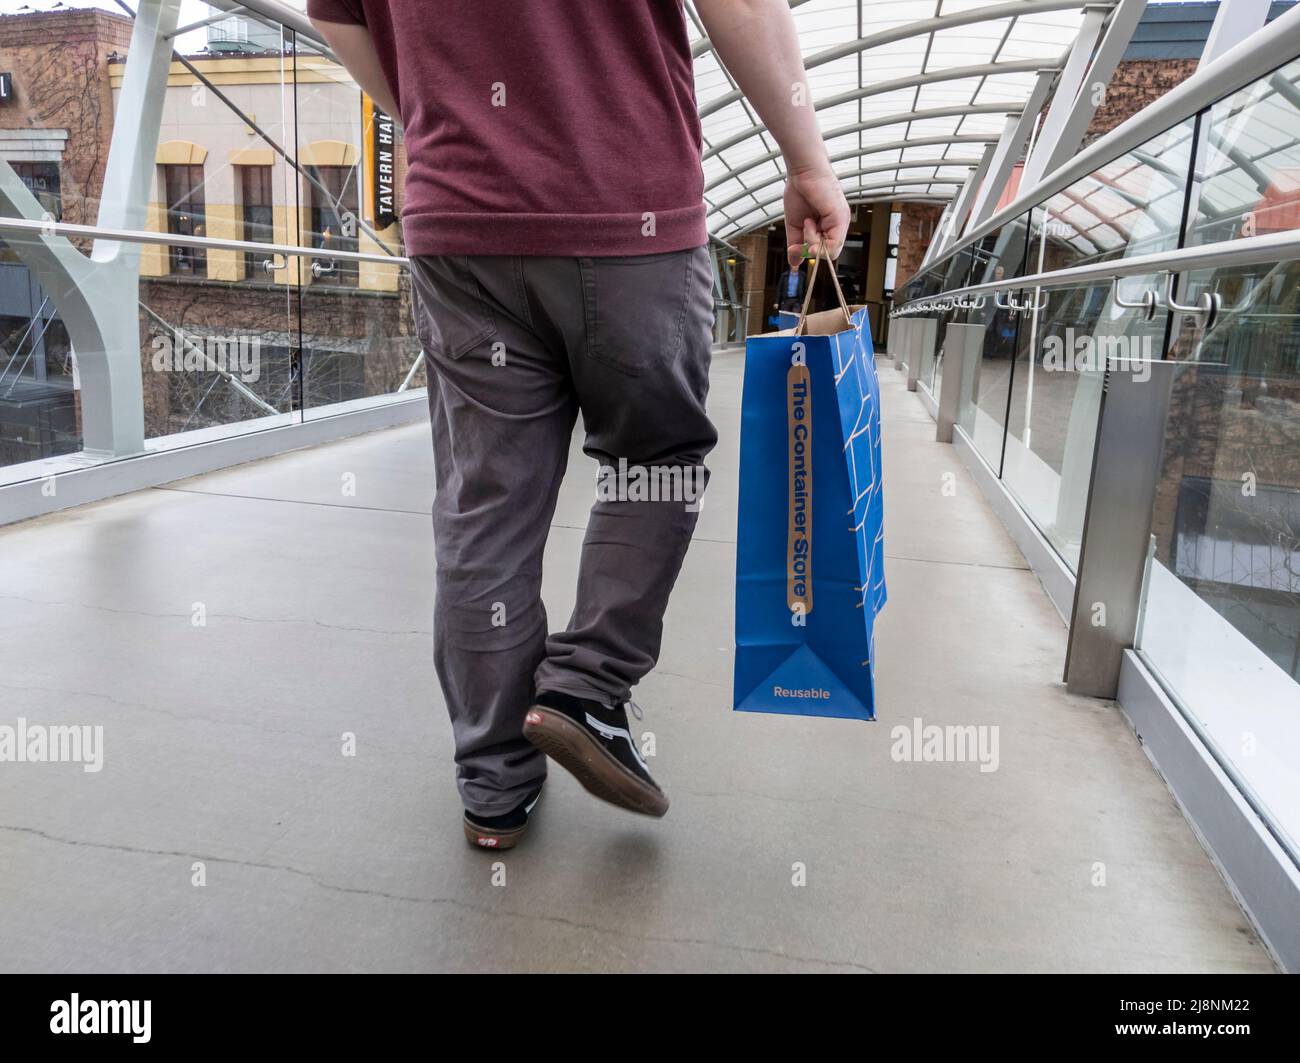 Bellevue, WA USA - circa April 2022: Low angle view of a man walking with a bag from The Container Store while wandering the Bellevue Mall Stock Photo